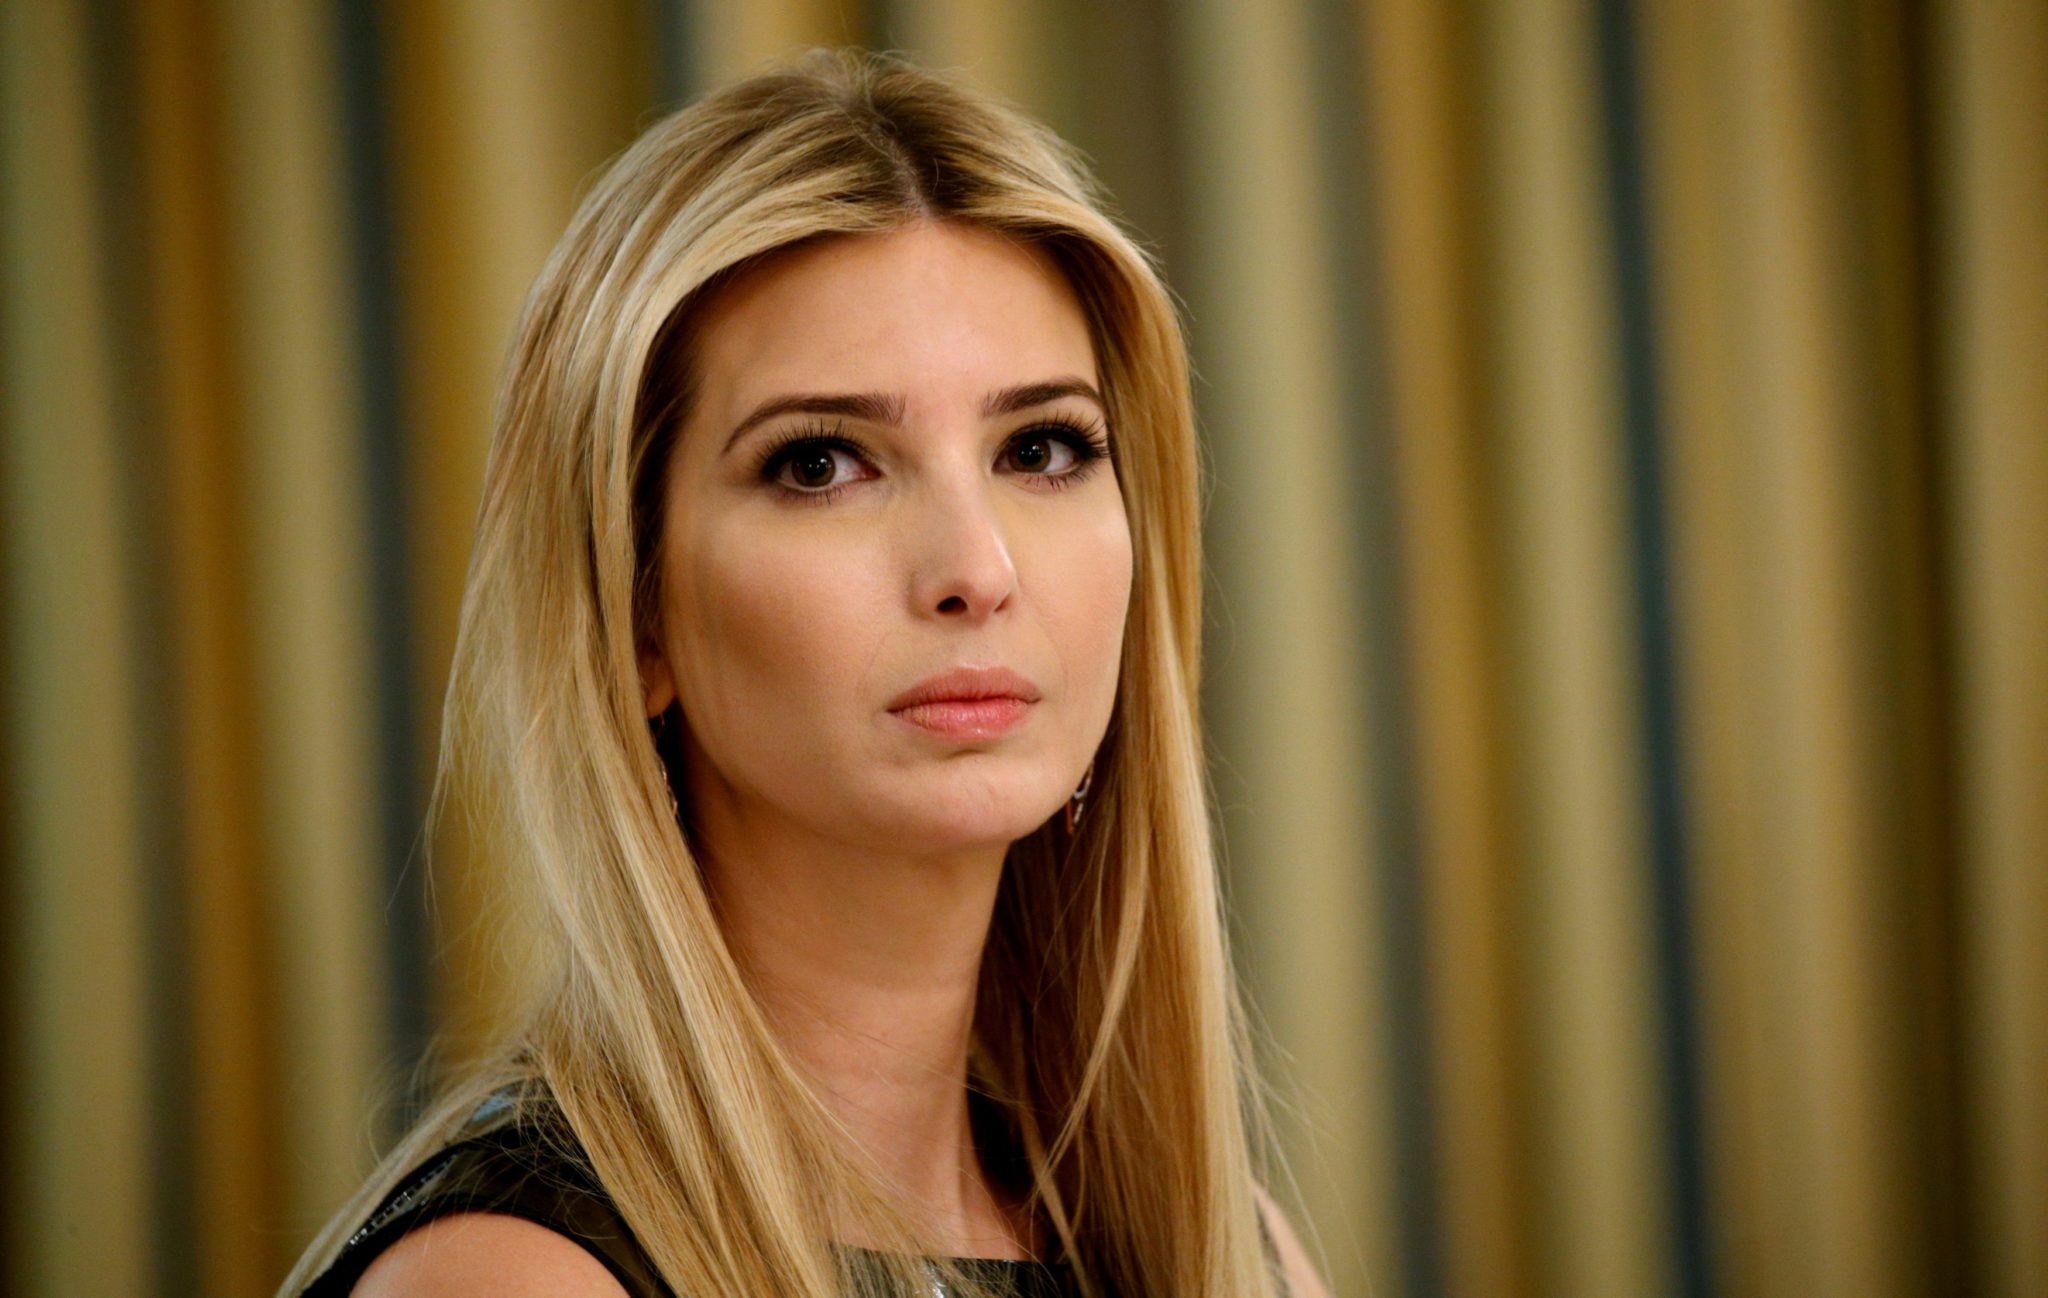 Ivanka Trump Rats Our Her Dad And Brothers In Fraud Case